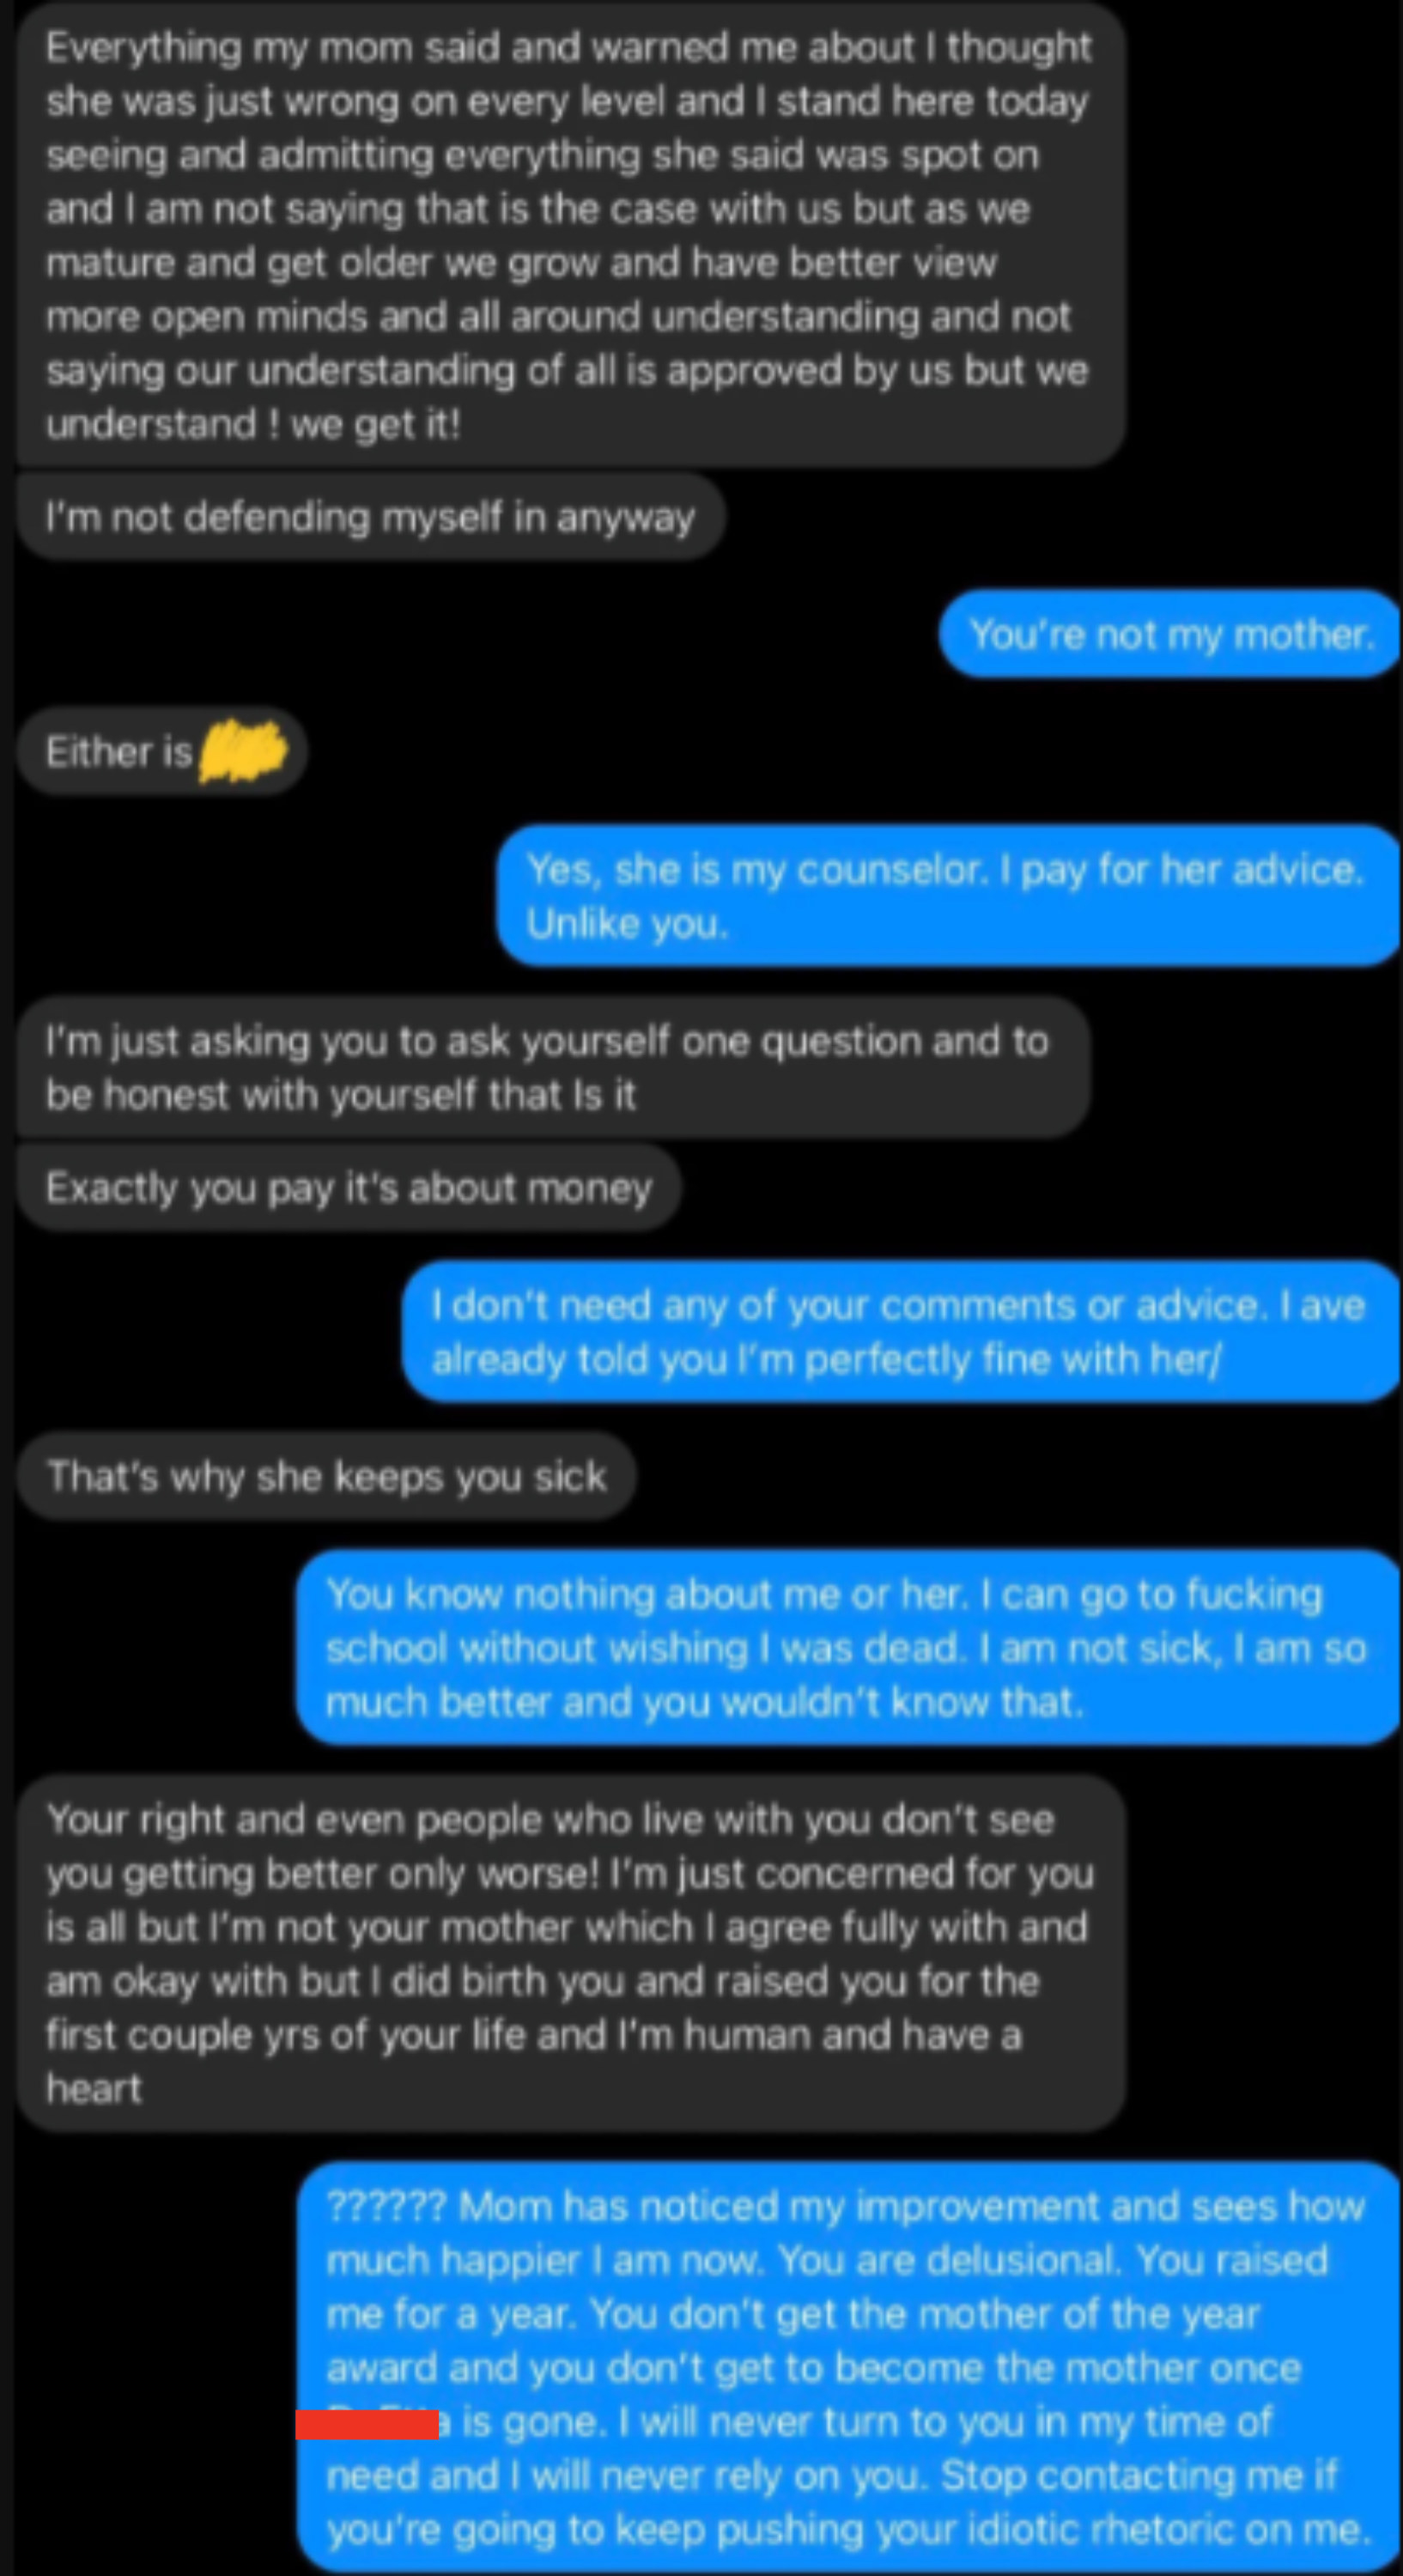 Kid defending themselves: &quot;You know nothing about me or her. I can go to fucking school without wishing I was dead. I am not sick, I am so much better and you wouldn&#x27;t know that&quot;